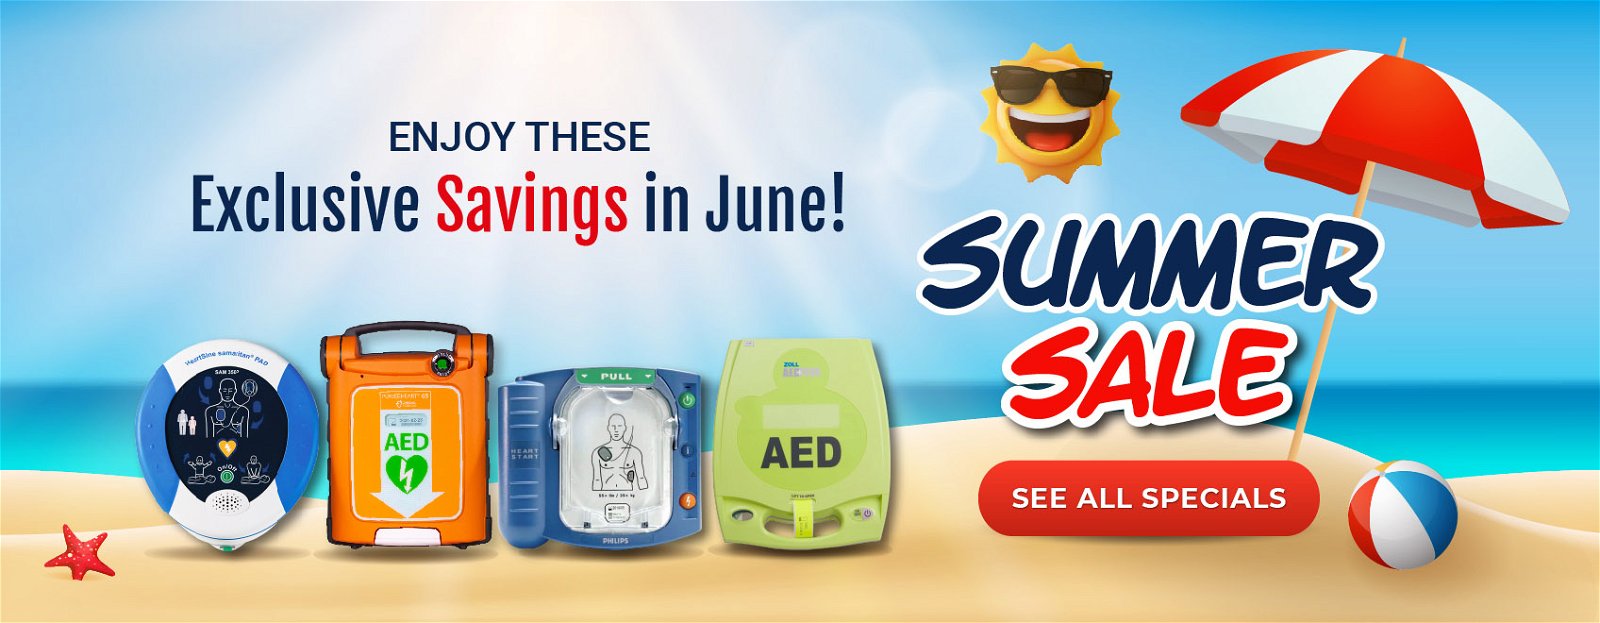 Buy an AED Device - AED Defibrillators June 2024 Summer Sale